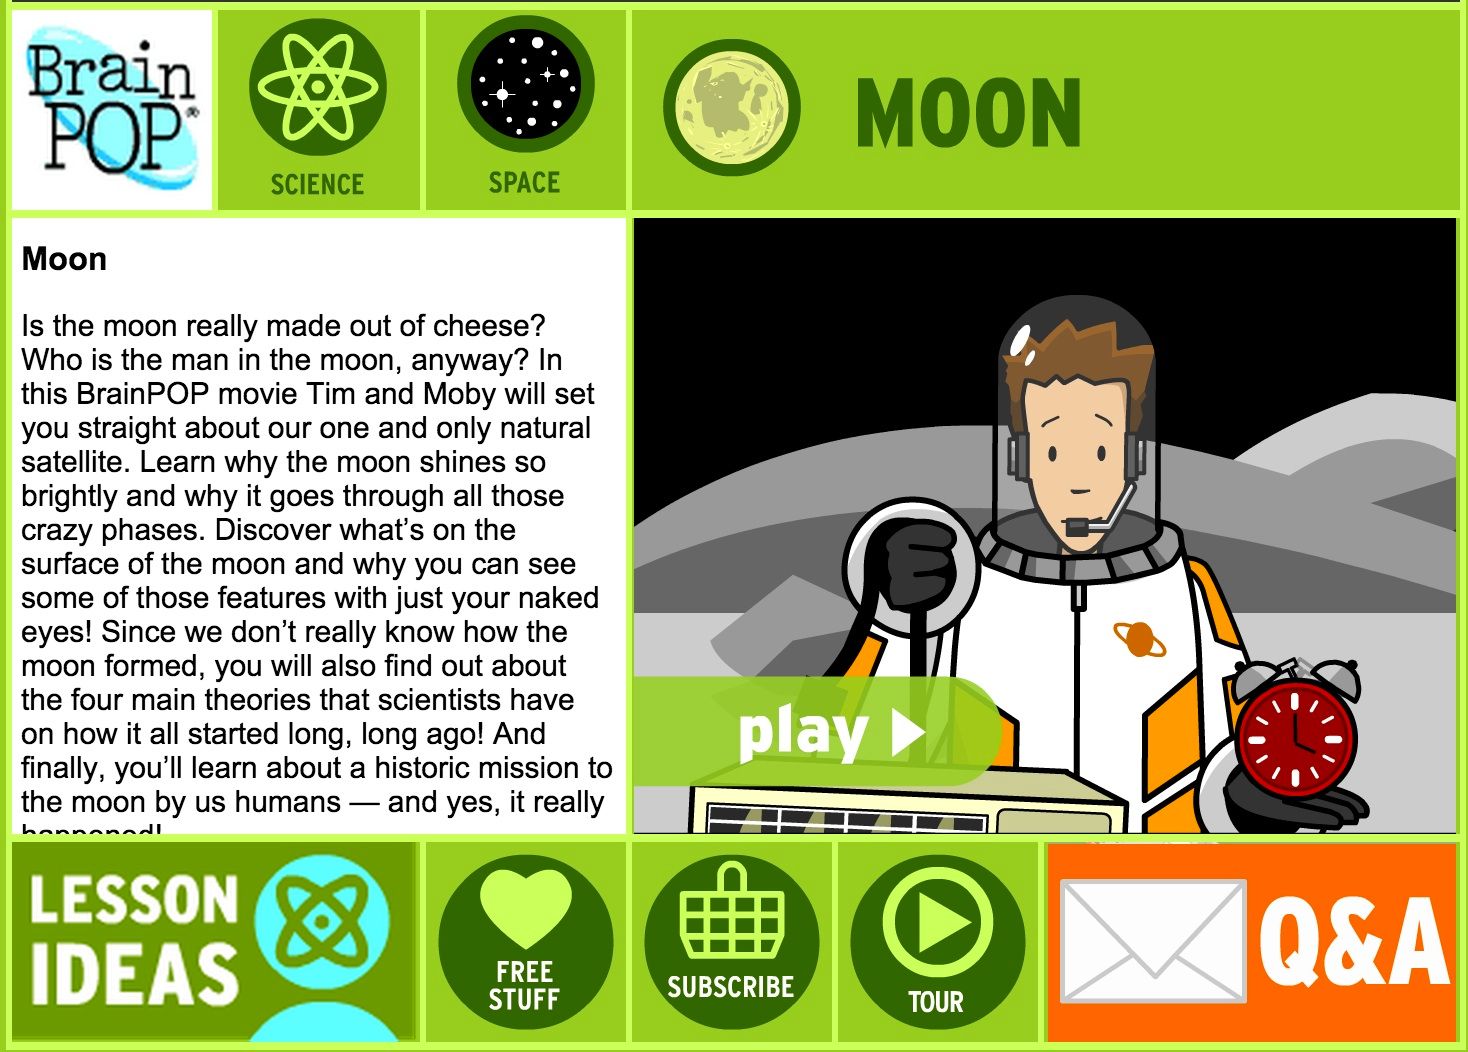 The Brain Pop app and website has fantastic info about the moon for kids